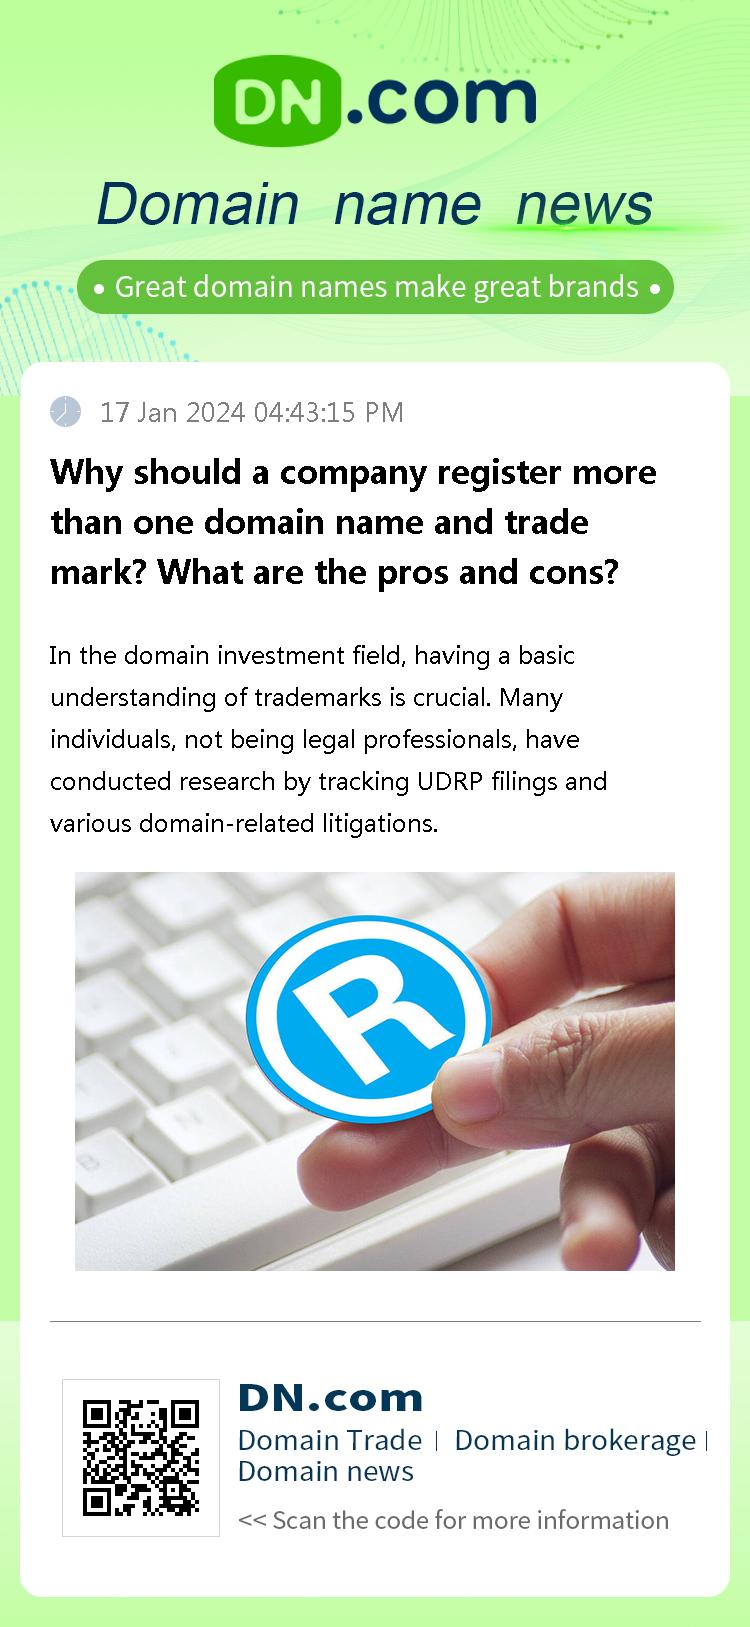 Why should a company register more than one domain name and trade mark? What are the pros and cons?